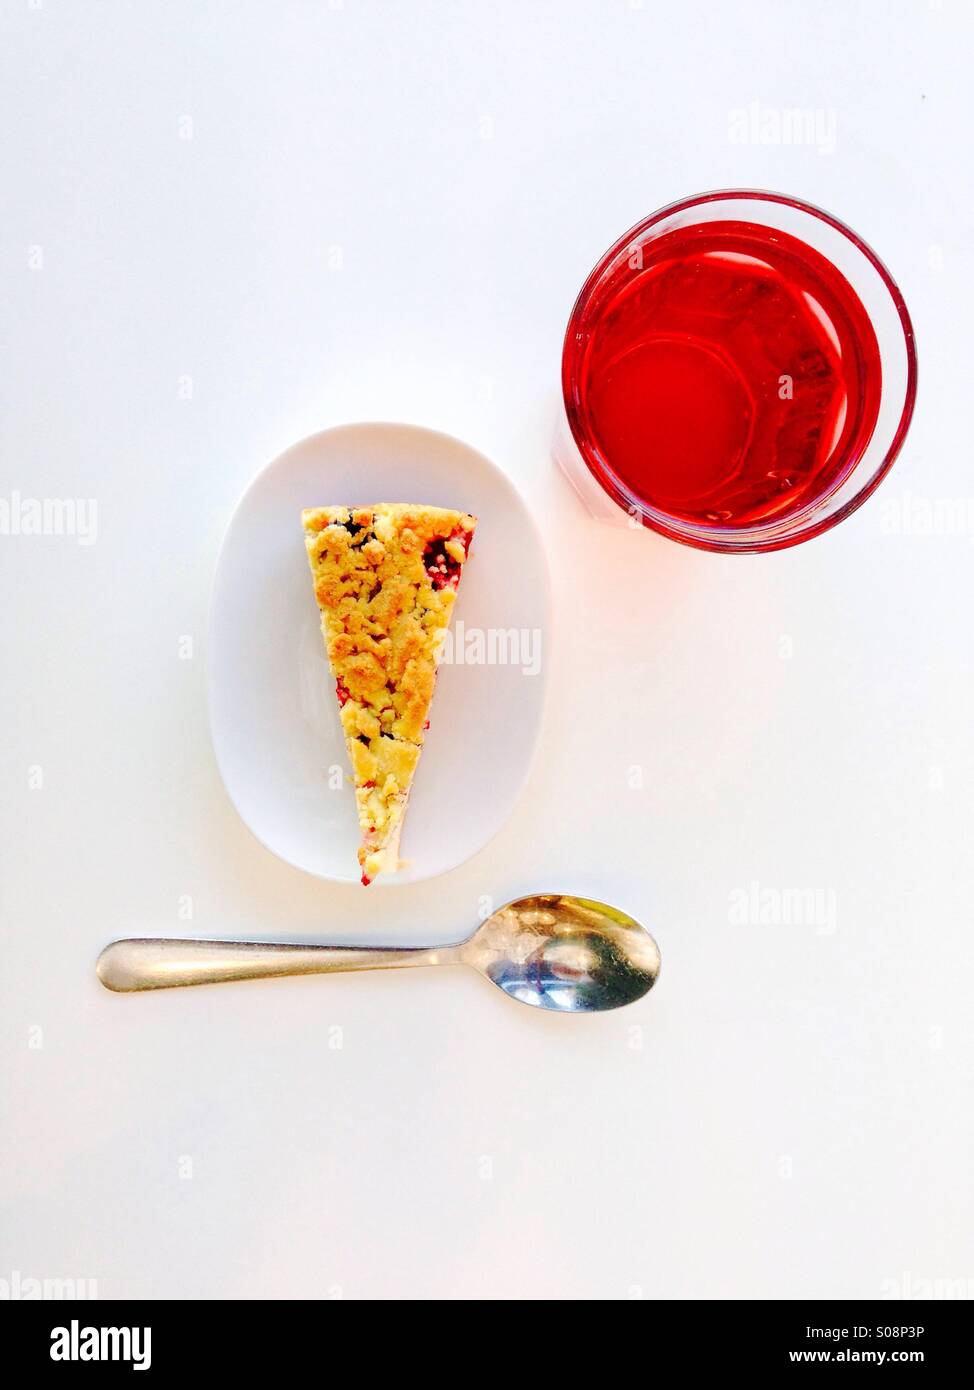 Cheesecake and drink seen from above Stock Photo